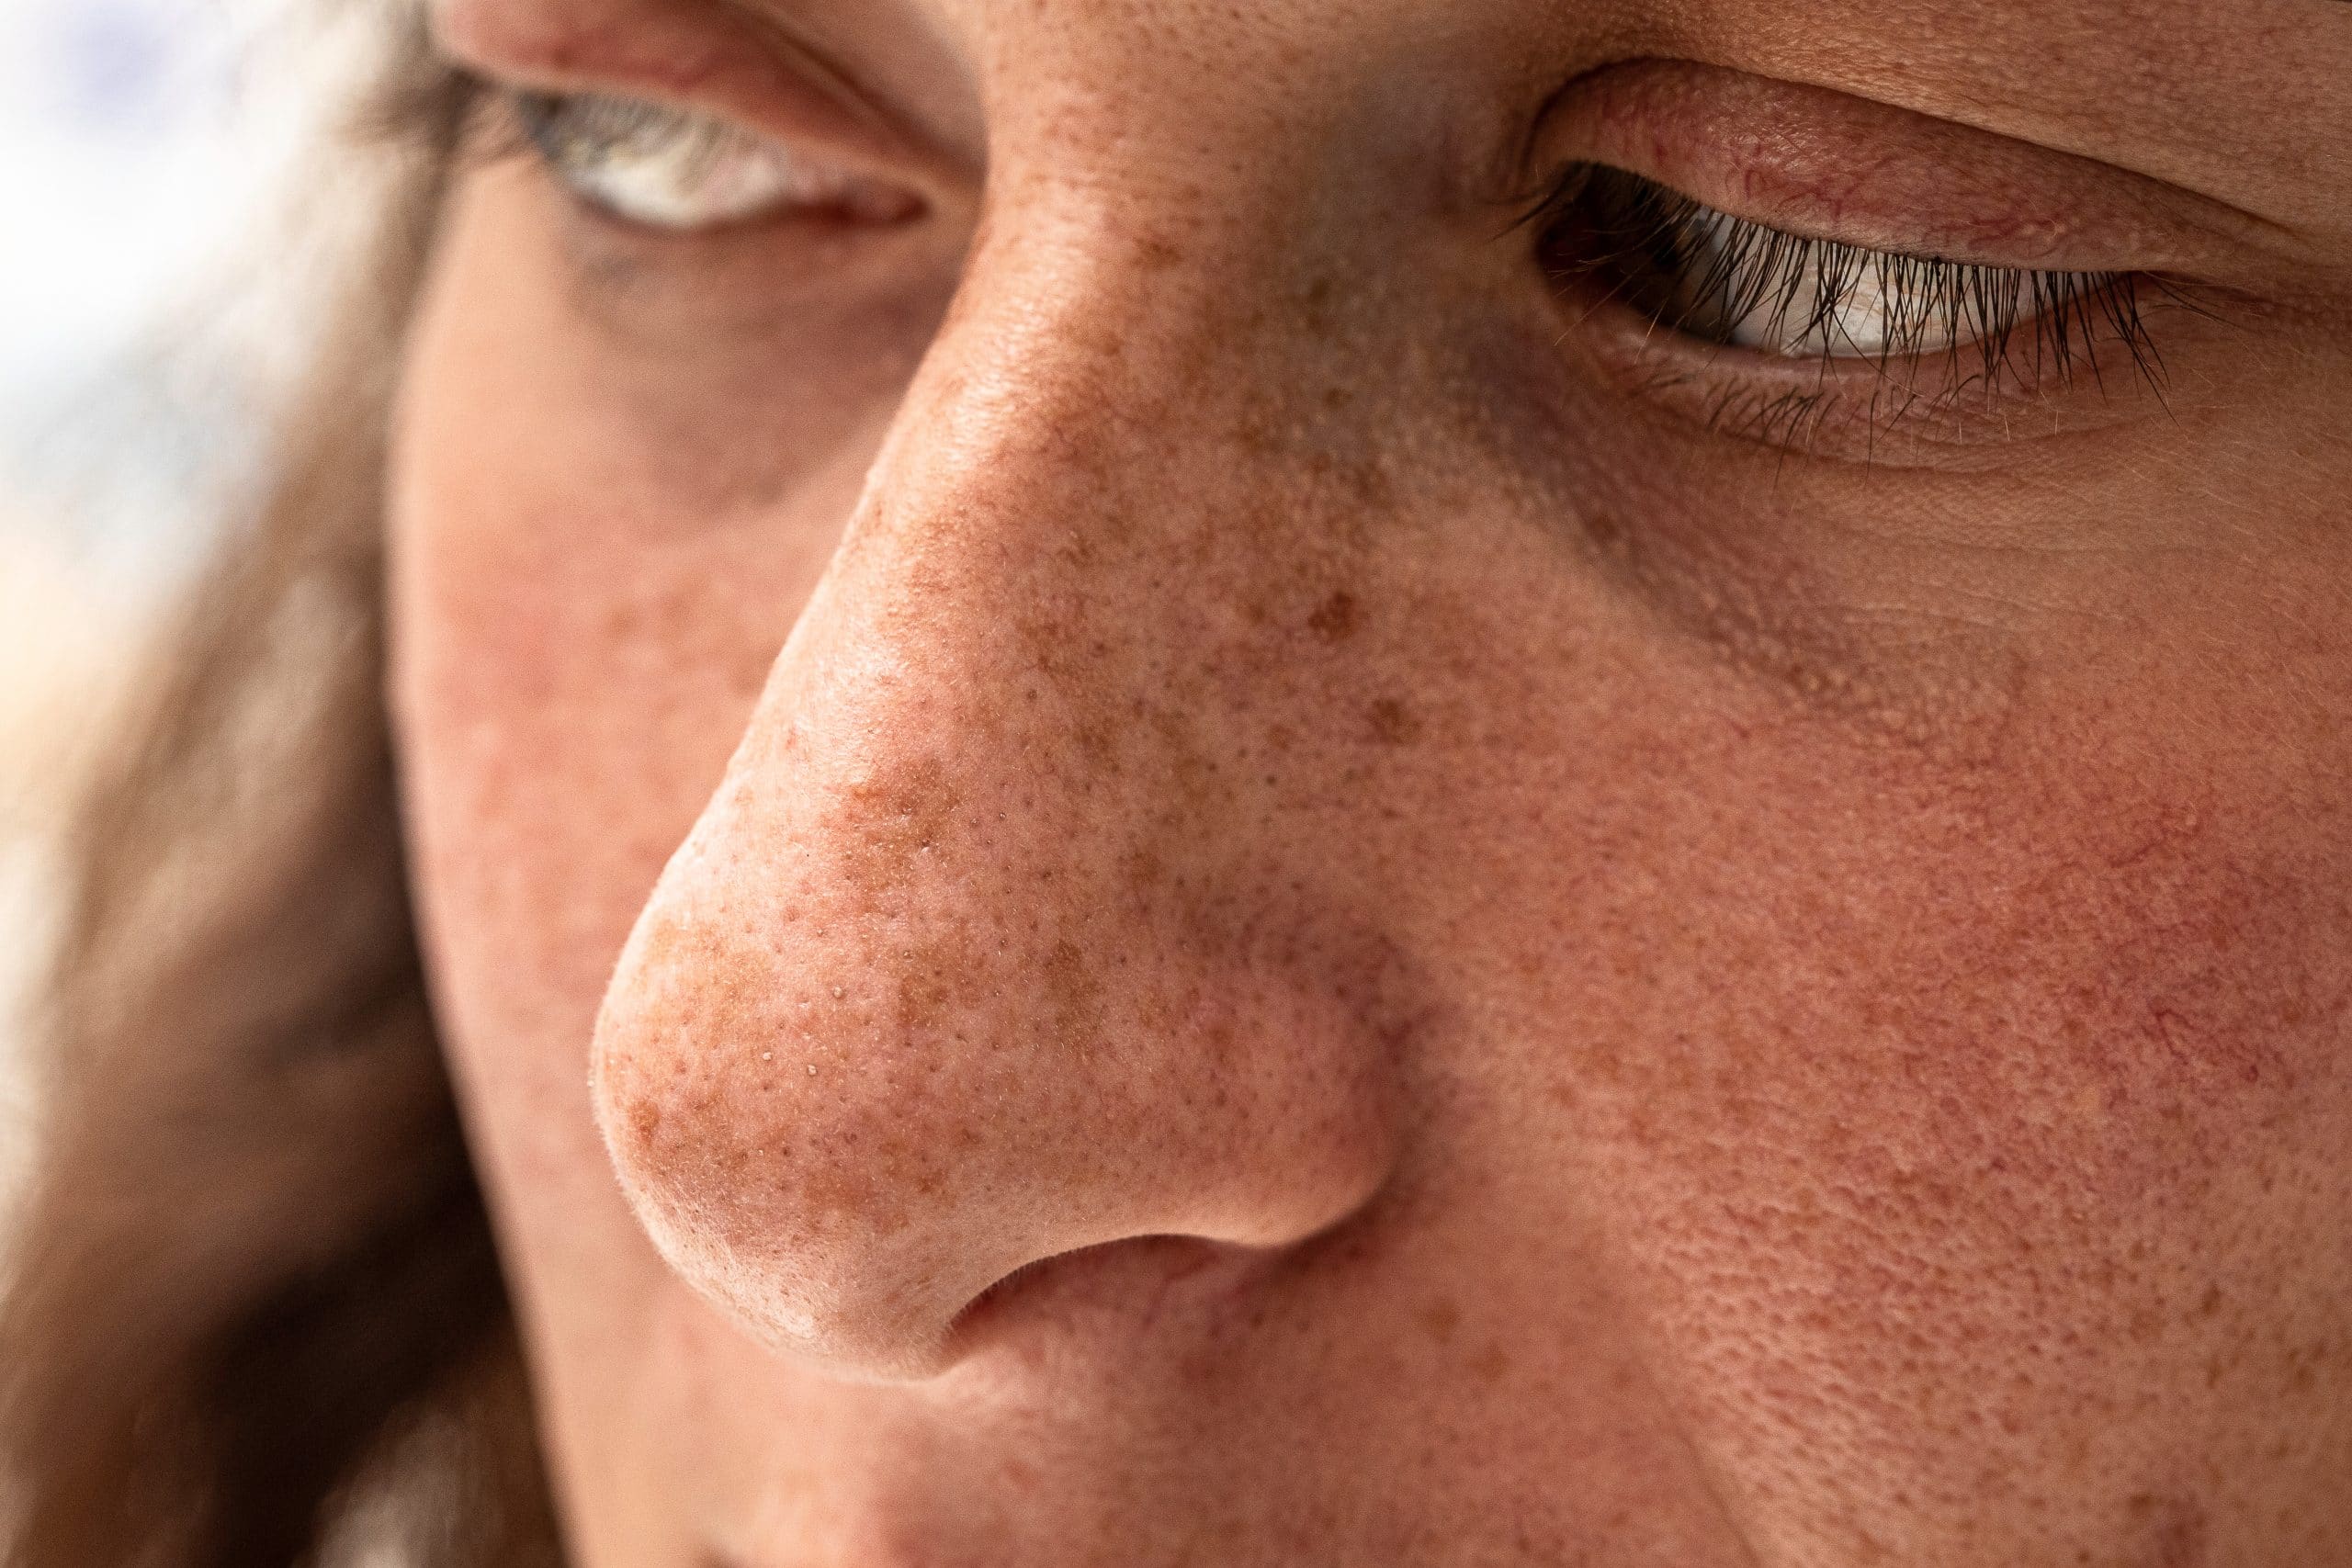 A freckled nose with sunlight resting on it.